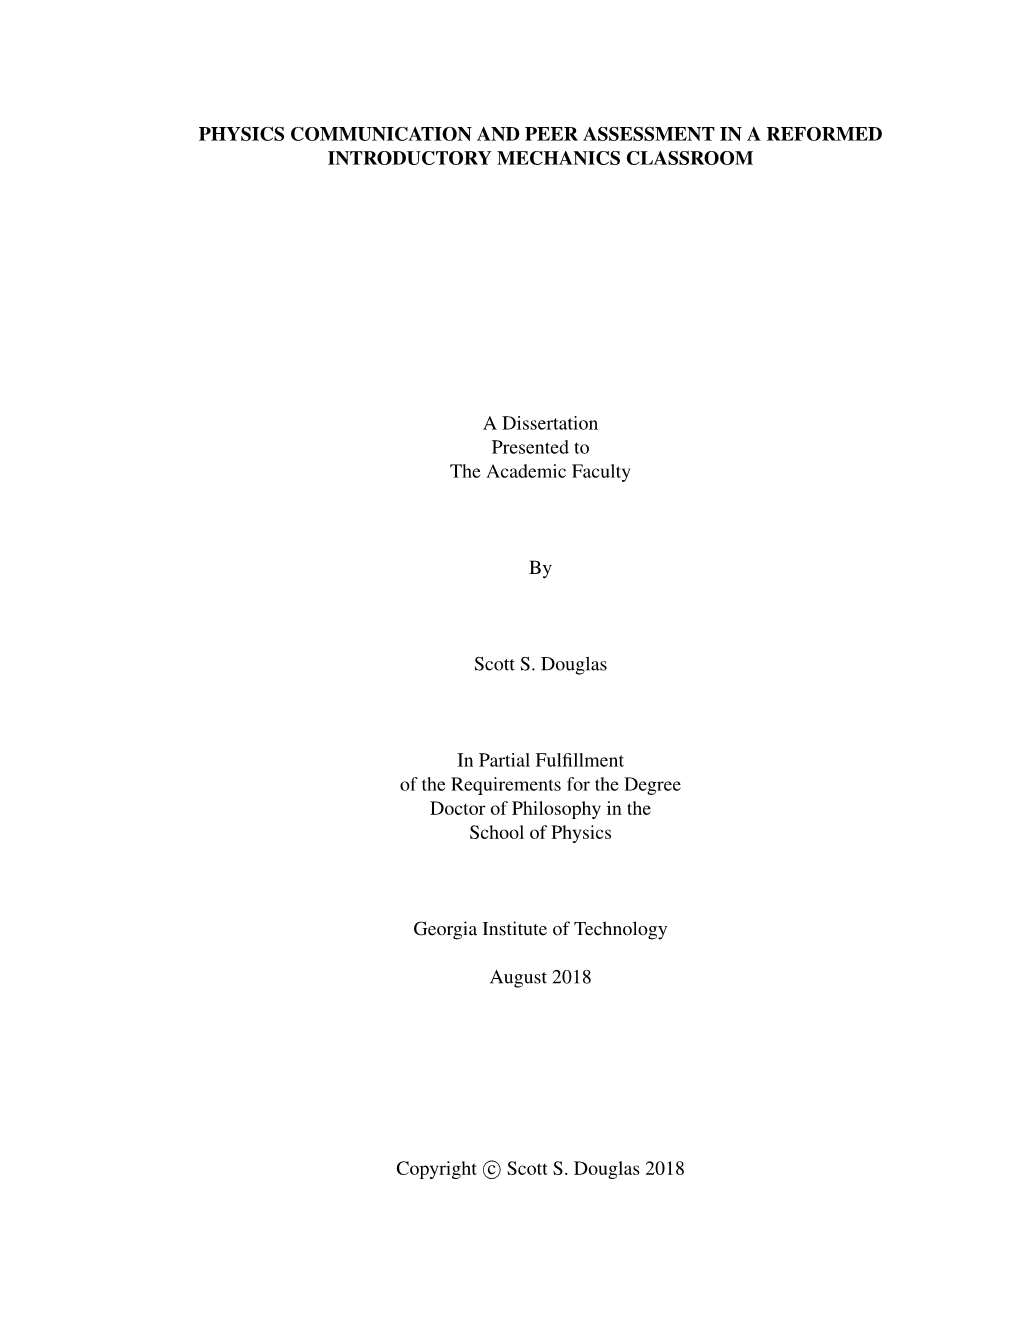 PHYSICS COMMUNICATION and PEER ASSESSMENT in a REFORMED INTRODUCTORY MECHANICS CLASSROOM a Dissertation Presented to the Academi